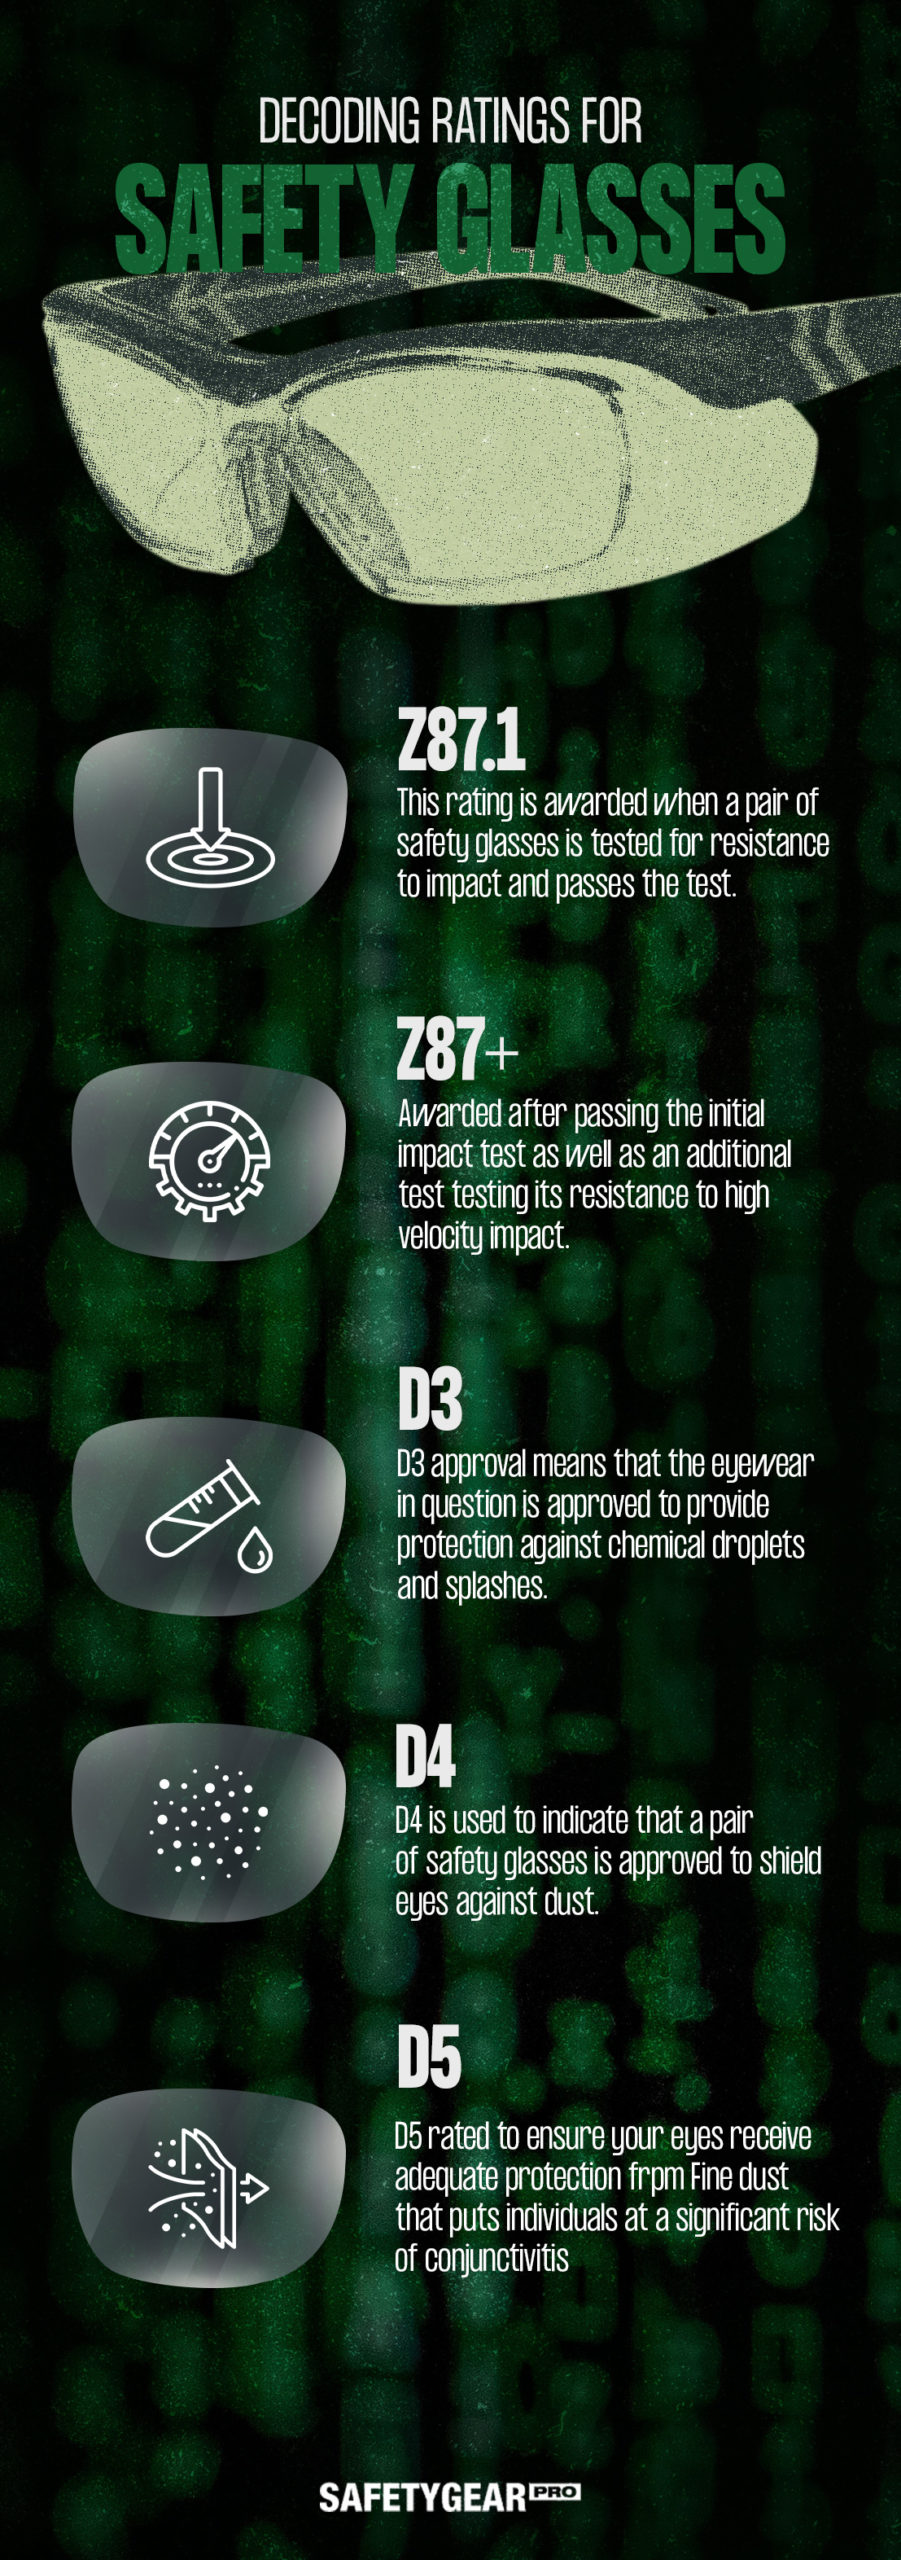 Decoding ratings for safety glasses infographic